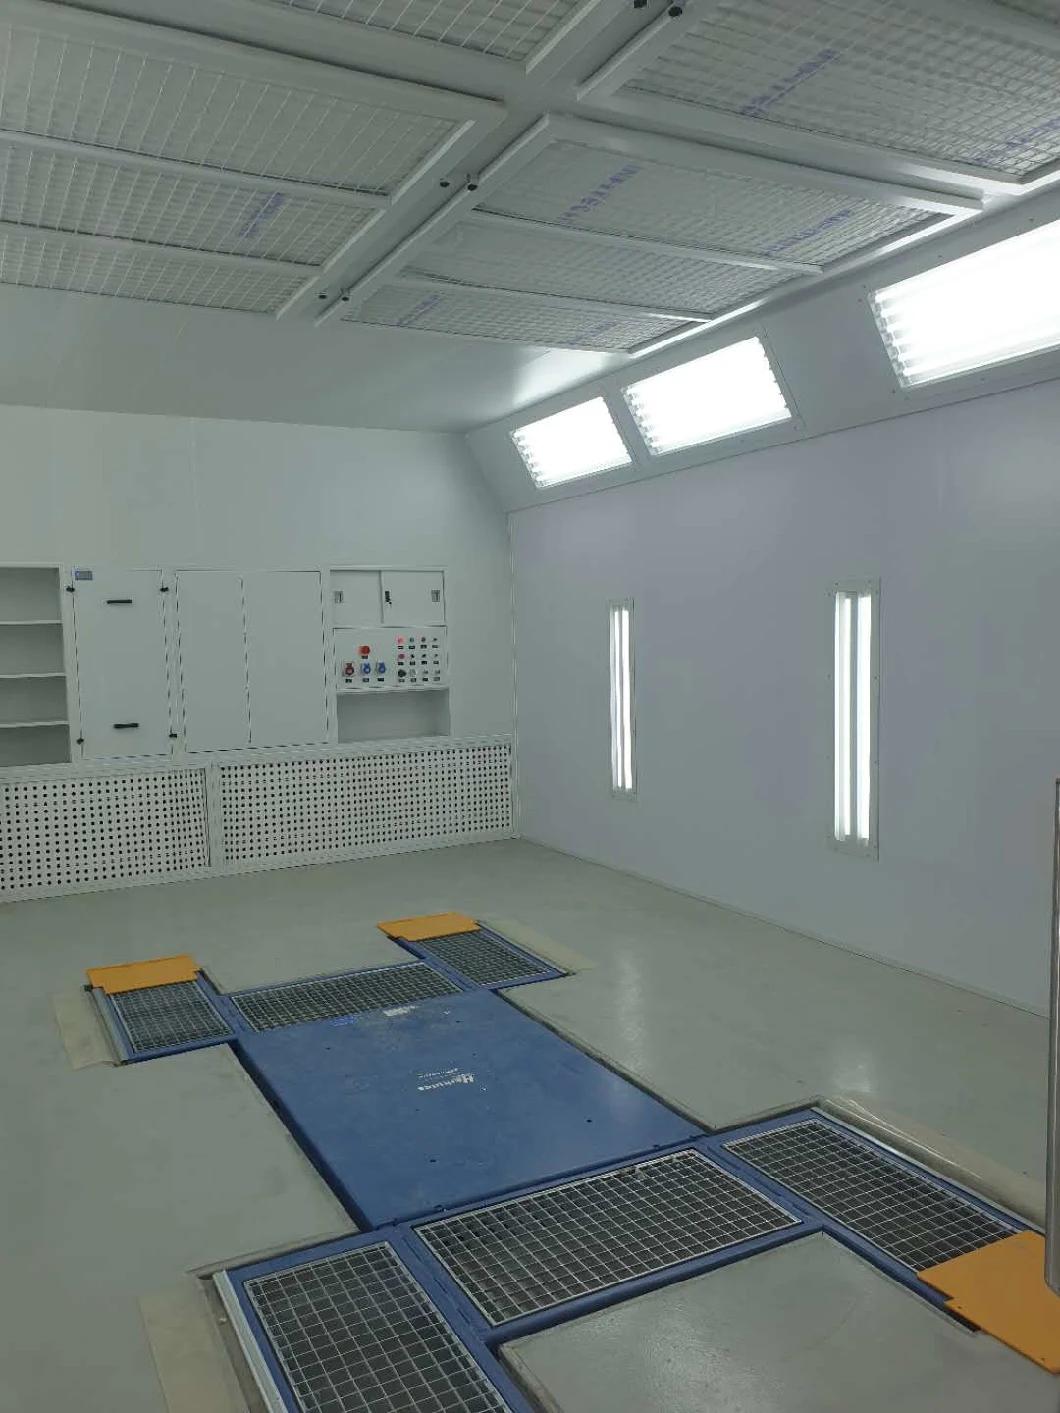 Car Spray Booth Standard Booth CE Standard Painting Room